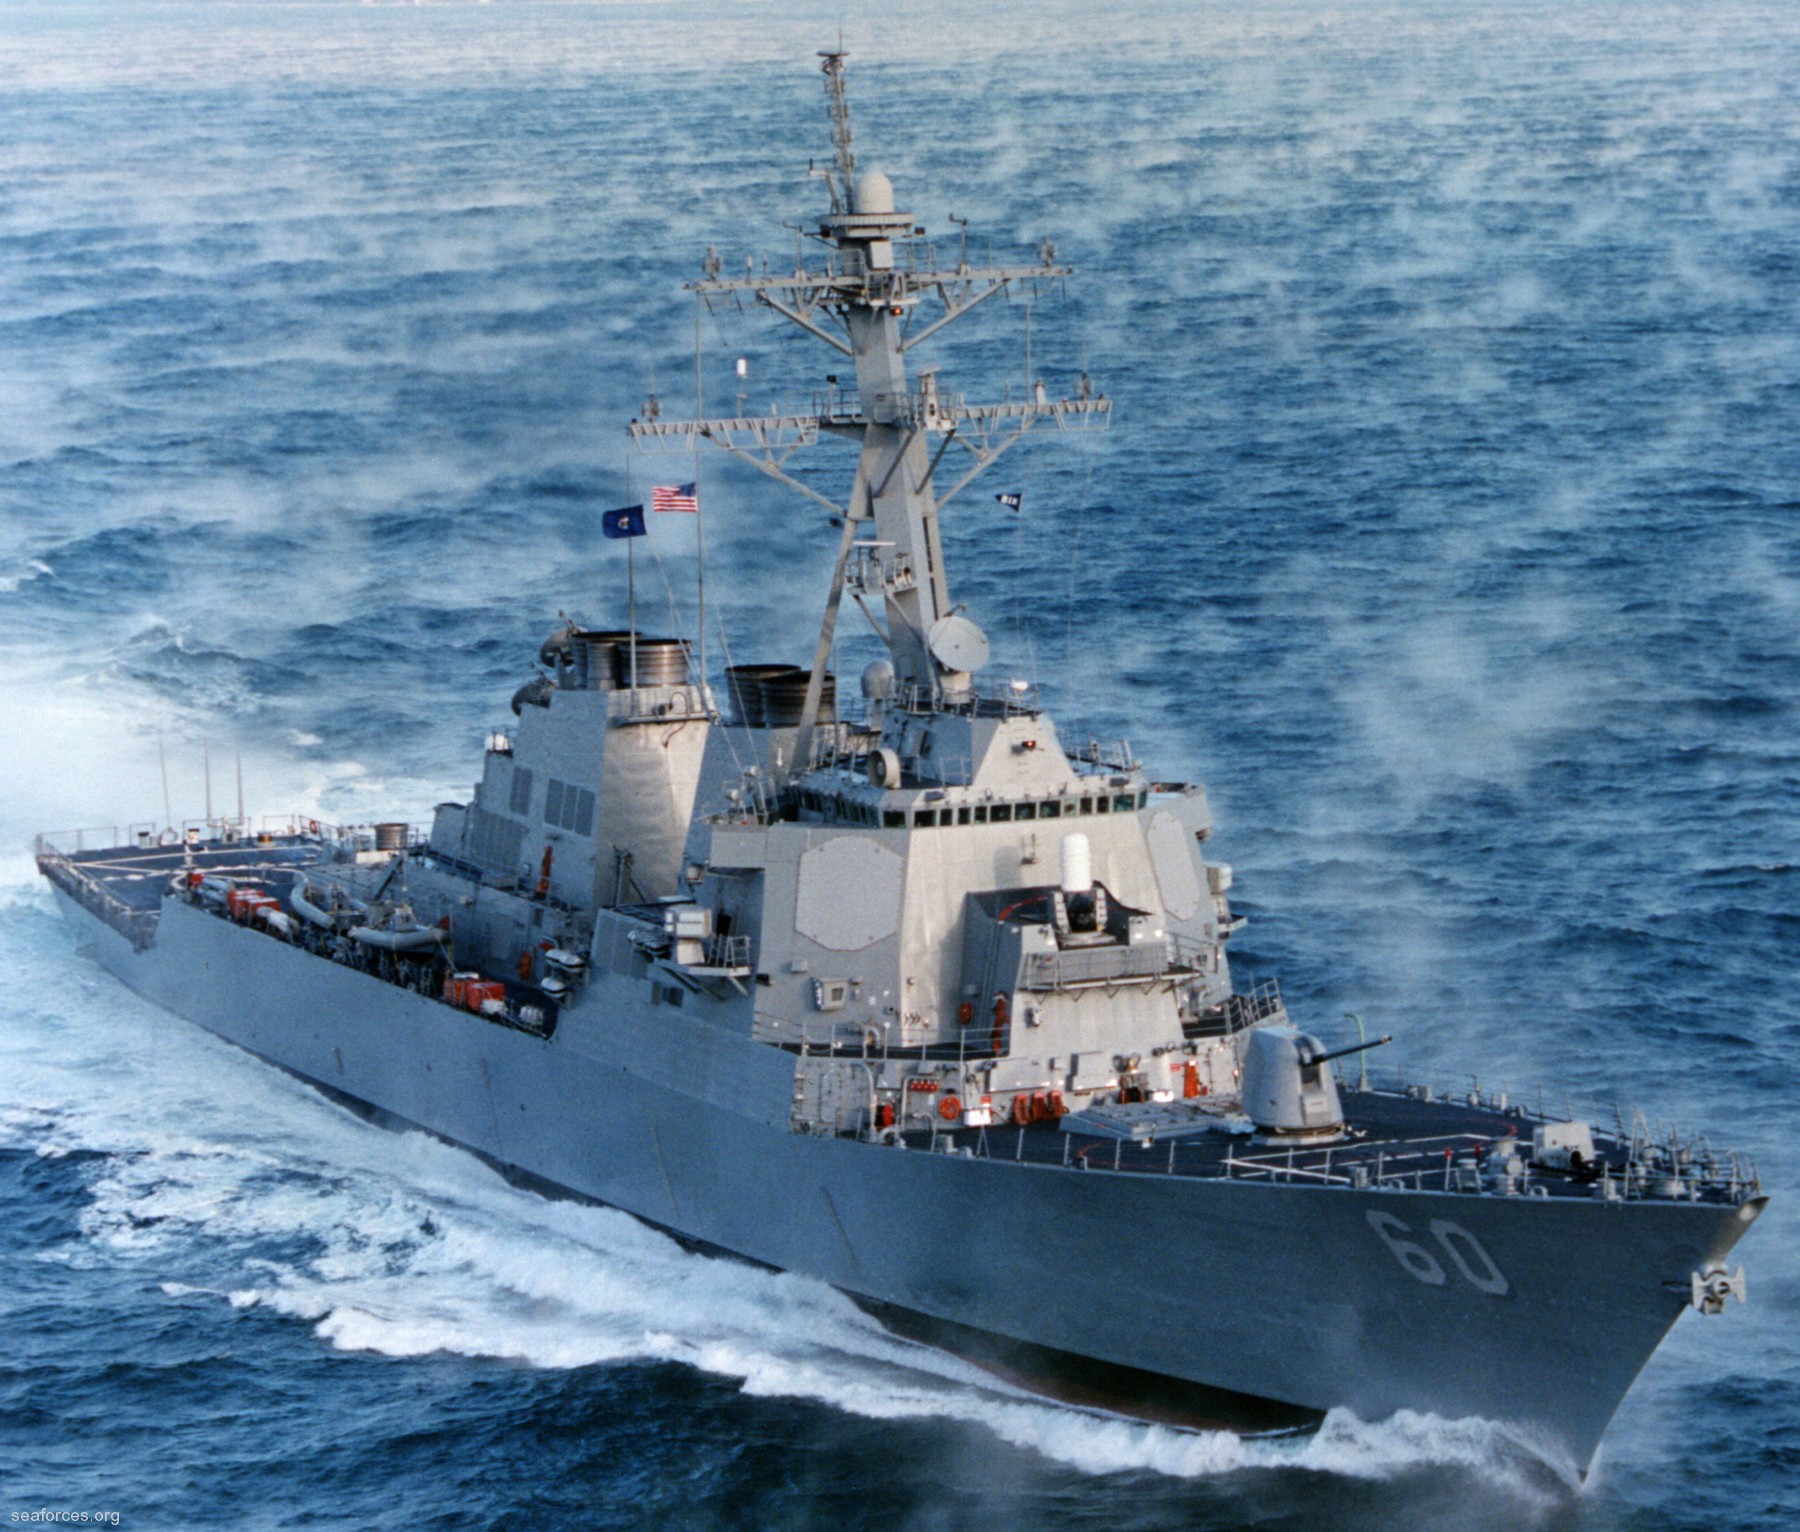 ddg-60 uss paul hamilton guided missile destroyer us navy 63